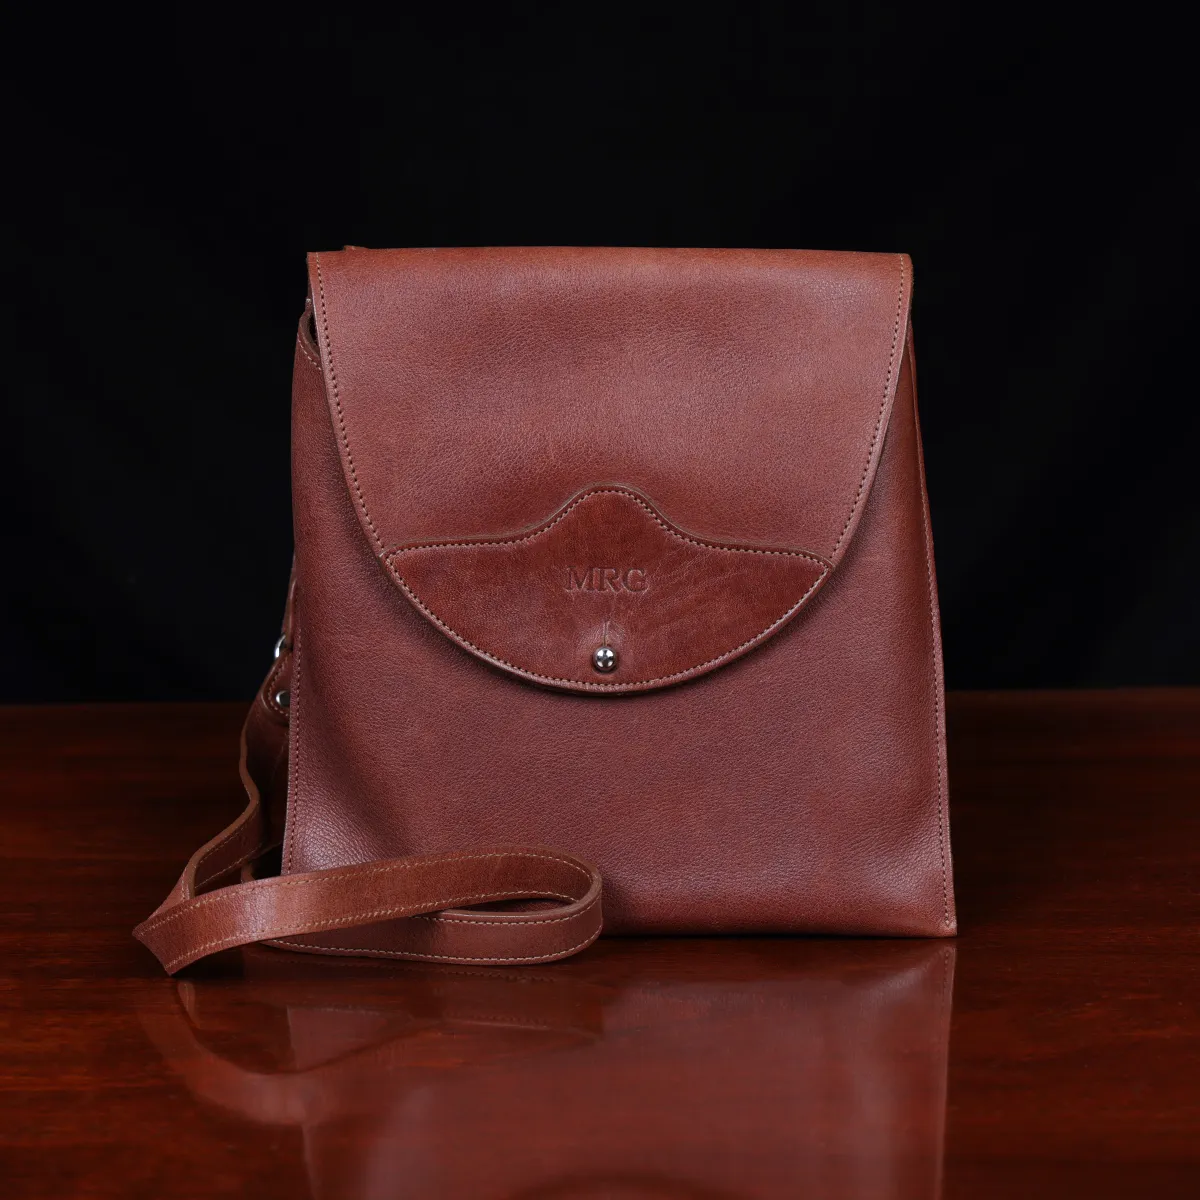 No. 22B Derby Handbag in Vintage Brown on a wood table with a dark background - front view